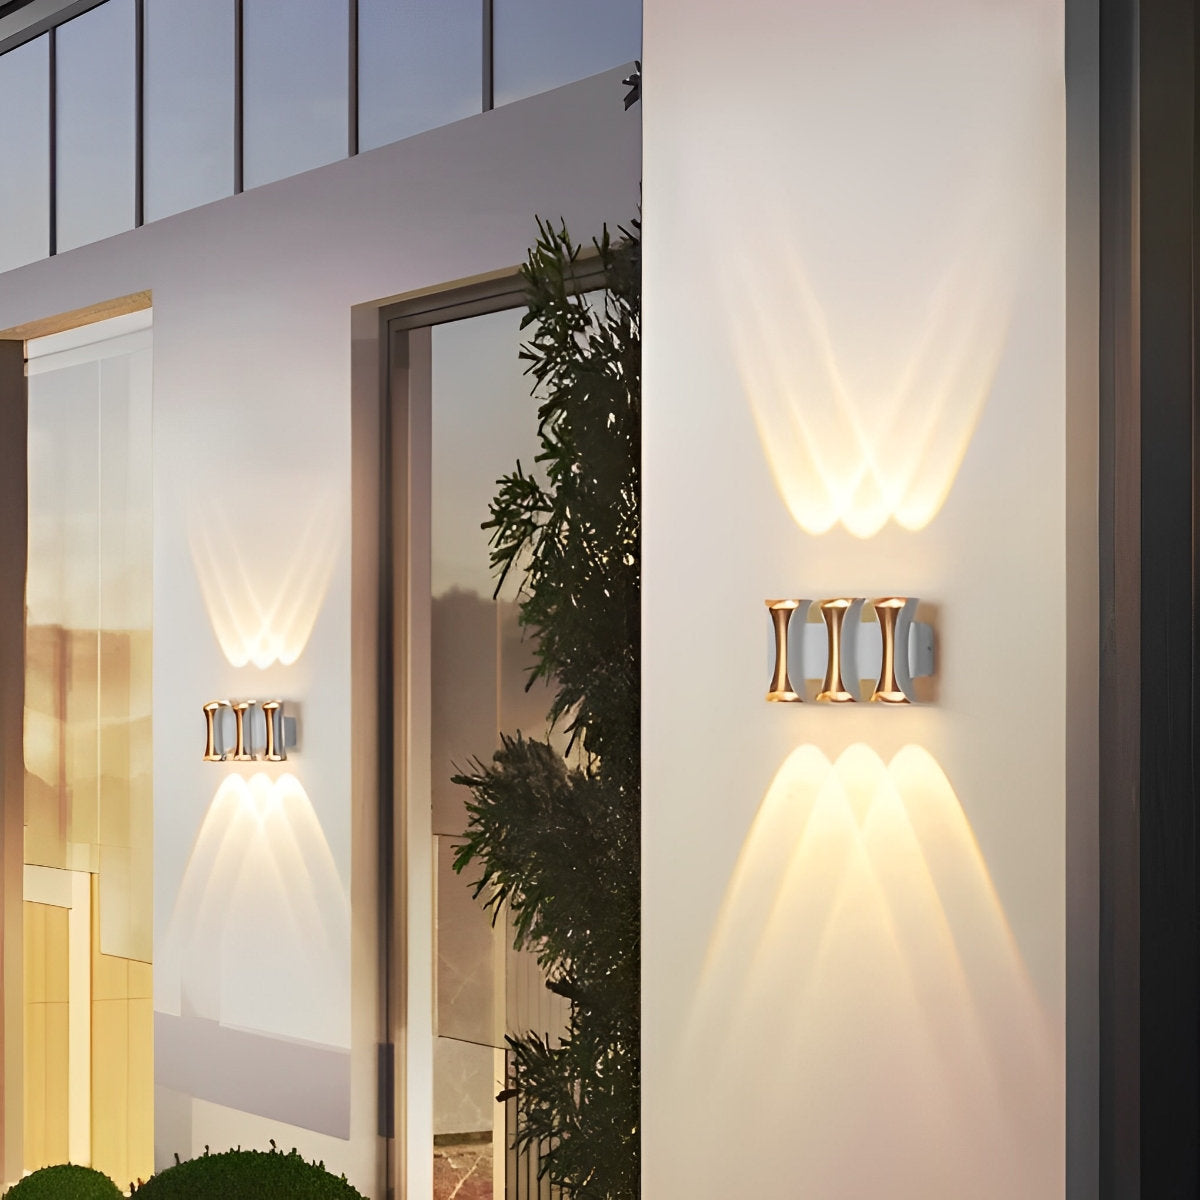 Waterproof Up and Down Lights LED Modern Outdoor Wall Sconce Exterior Lamp - Flyachilles